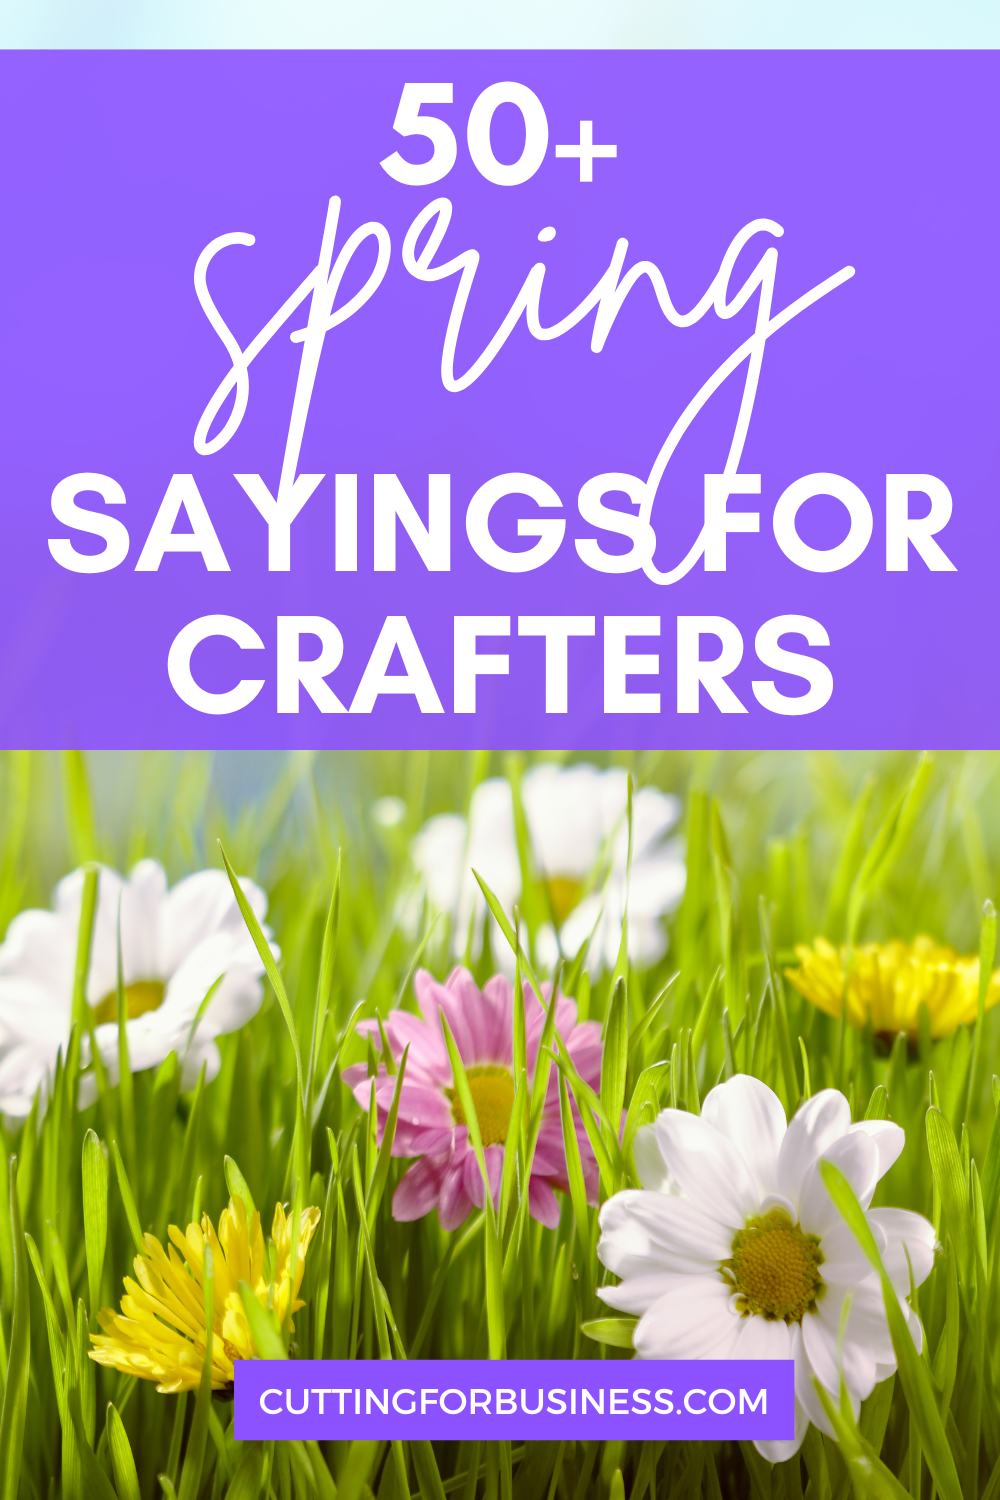 50+ Spring Sayings for Crafters - Perfect for wood signs, cards, t-shirts, and more - cuttingforbusiness.com.